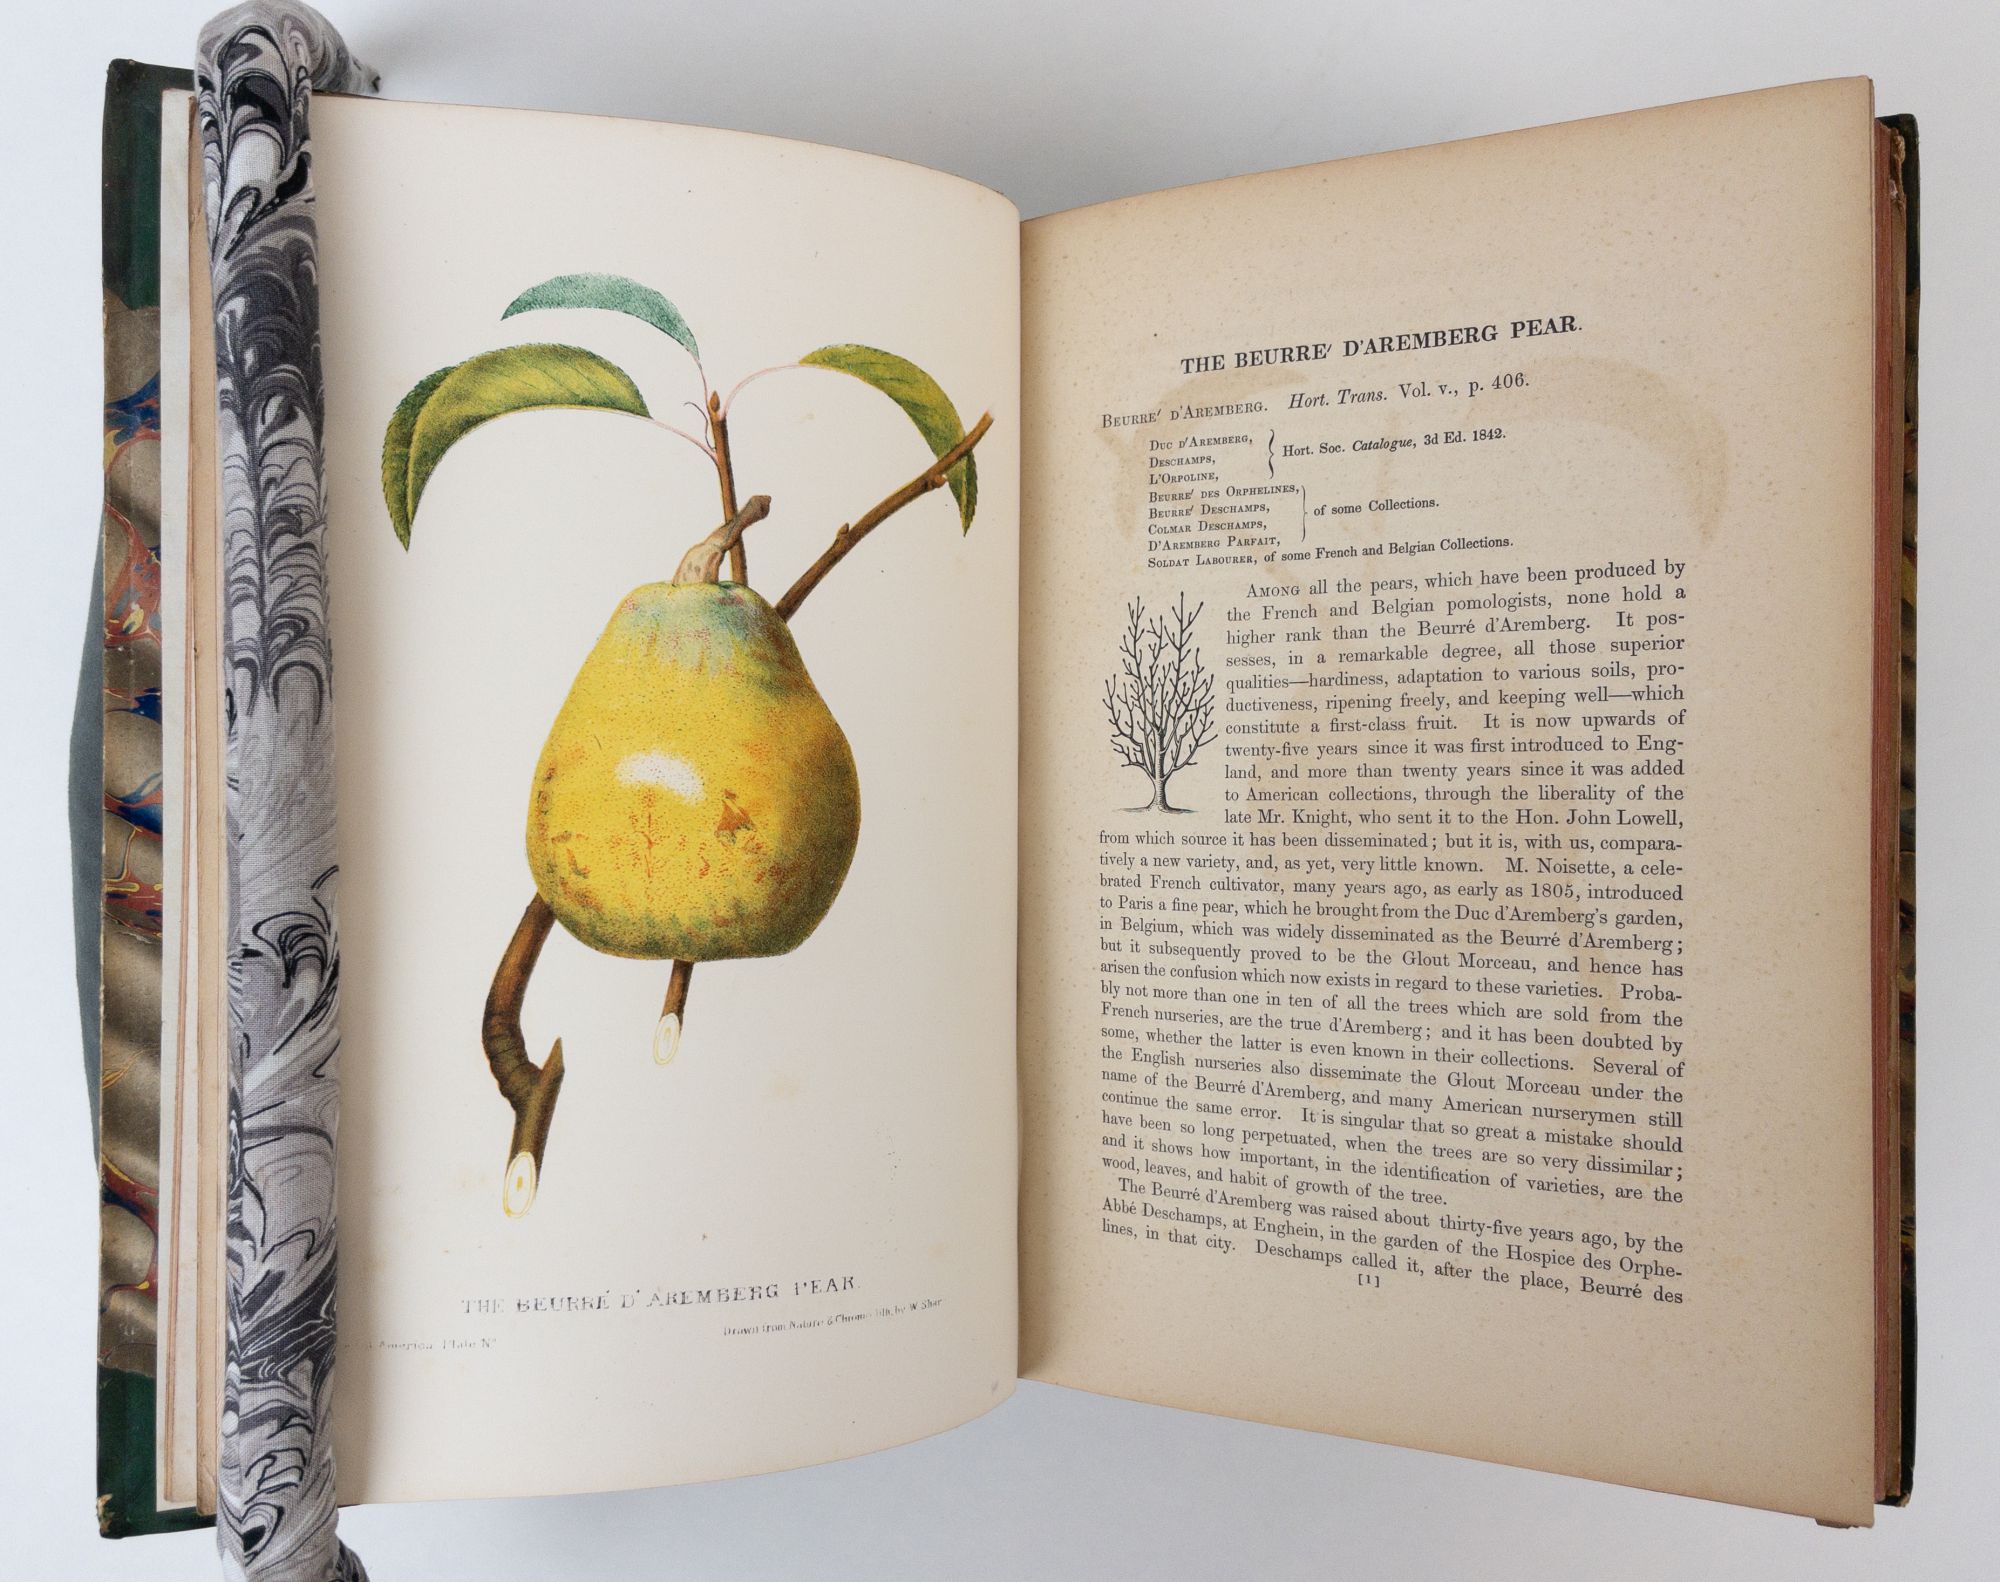 Product Image for THE FRUITS OF AMERICA, CONTAINING RICHLY COLORED FIGURES, AND FULL DESCRIPTIONS OF ALL THE CHOICEST VARIETIES CULTIVATED IN THE UNITED STATES [Two Volumes]